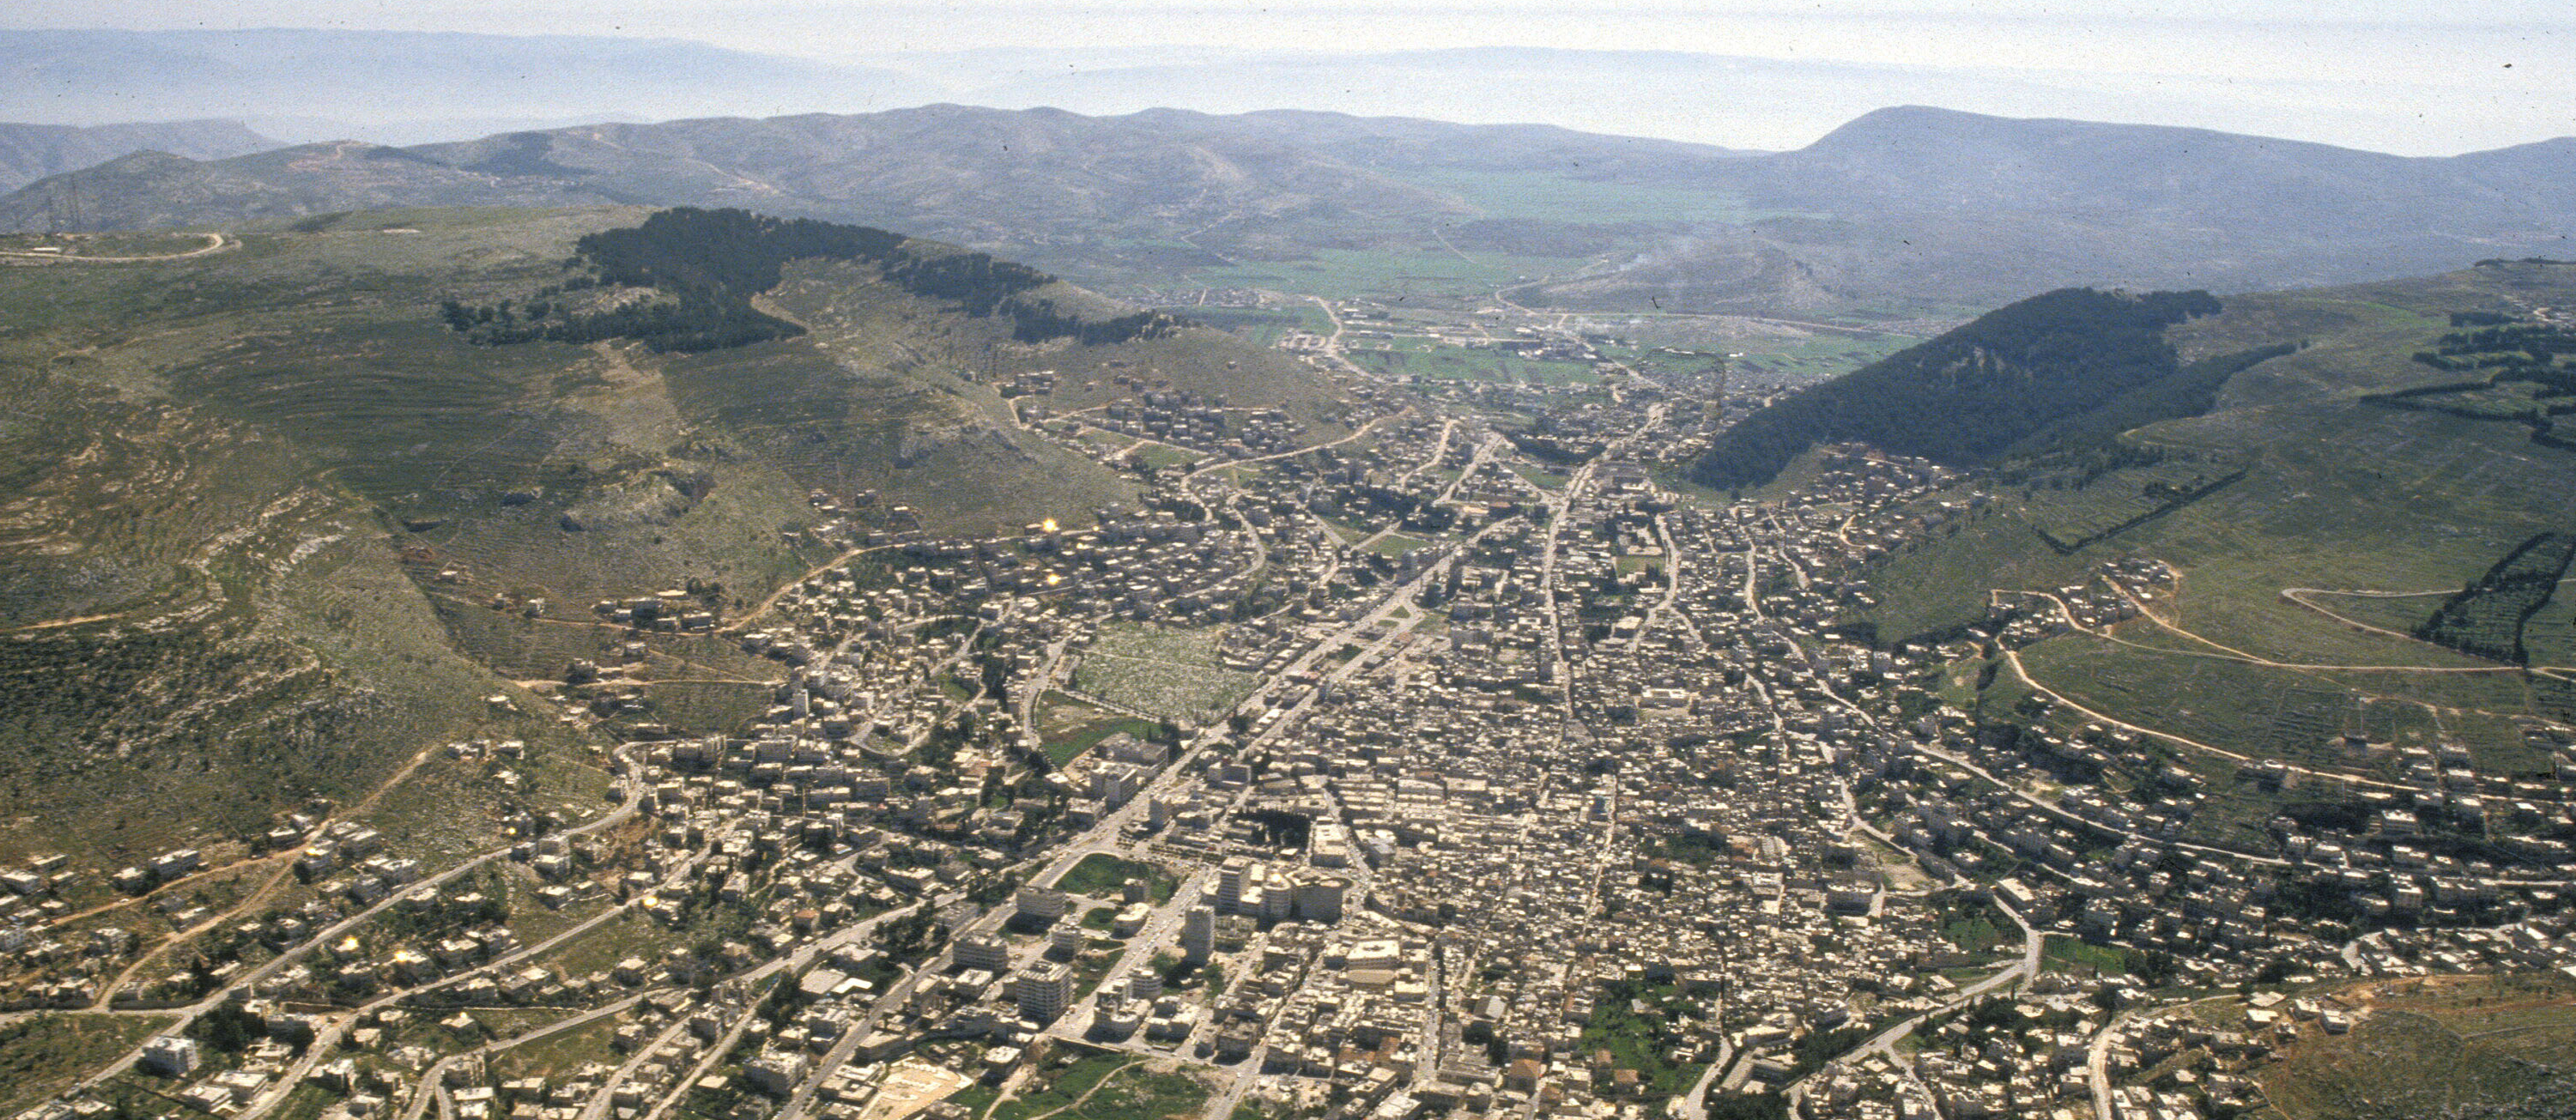 Aerial view of the city of Shechem (today's Nablus) with Mt Gerizim of the right and Mt Ebal on the left.